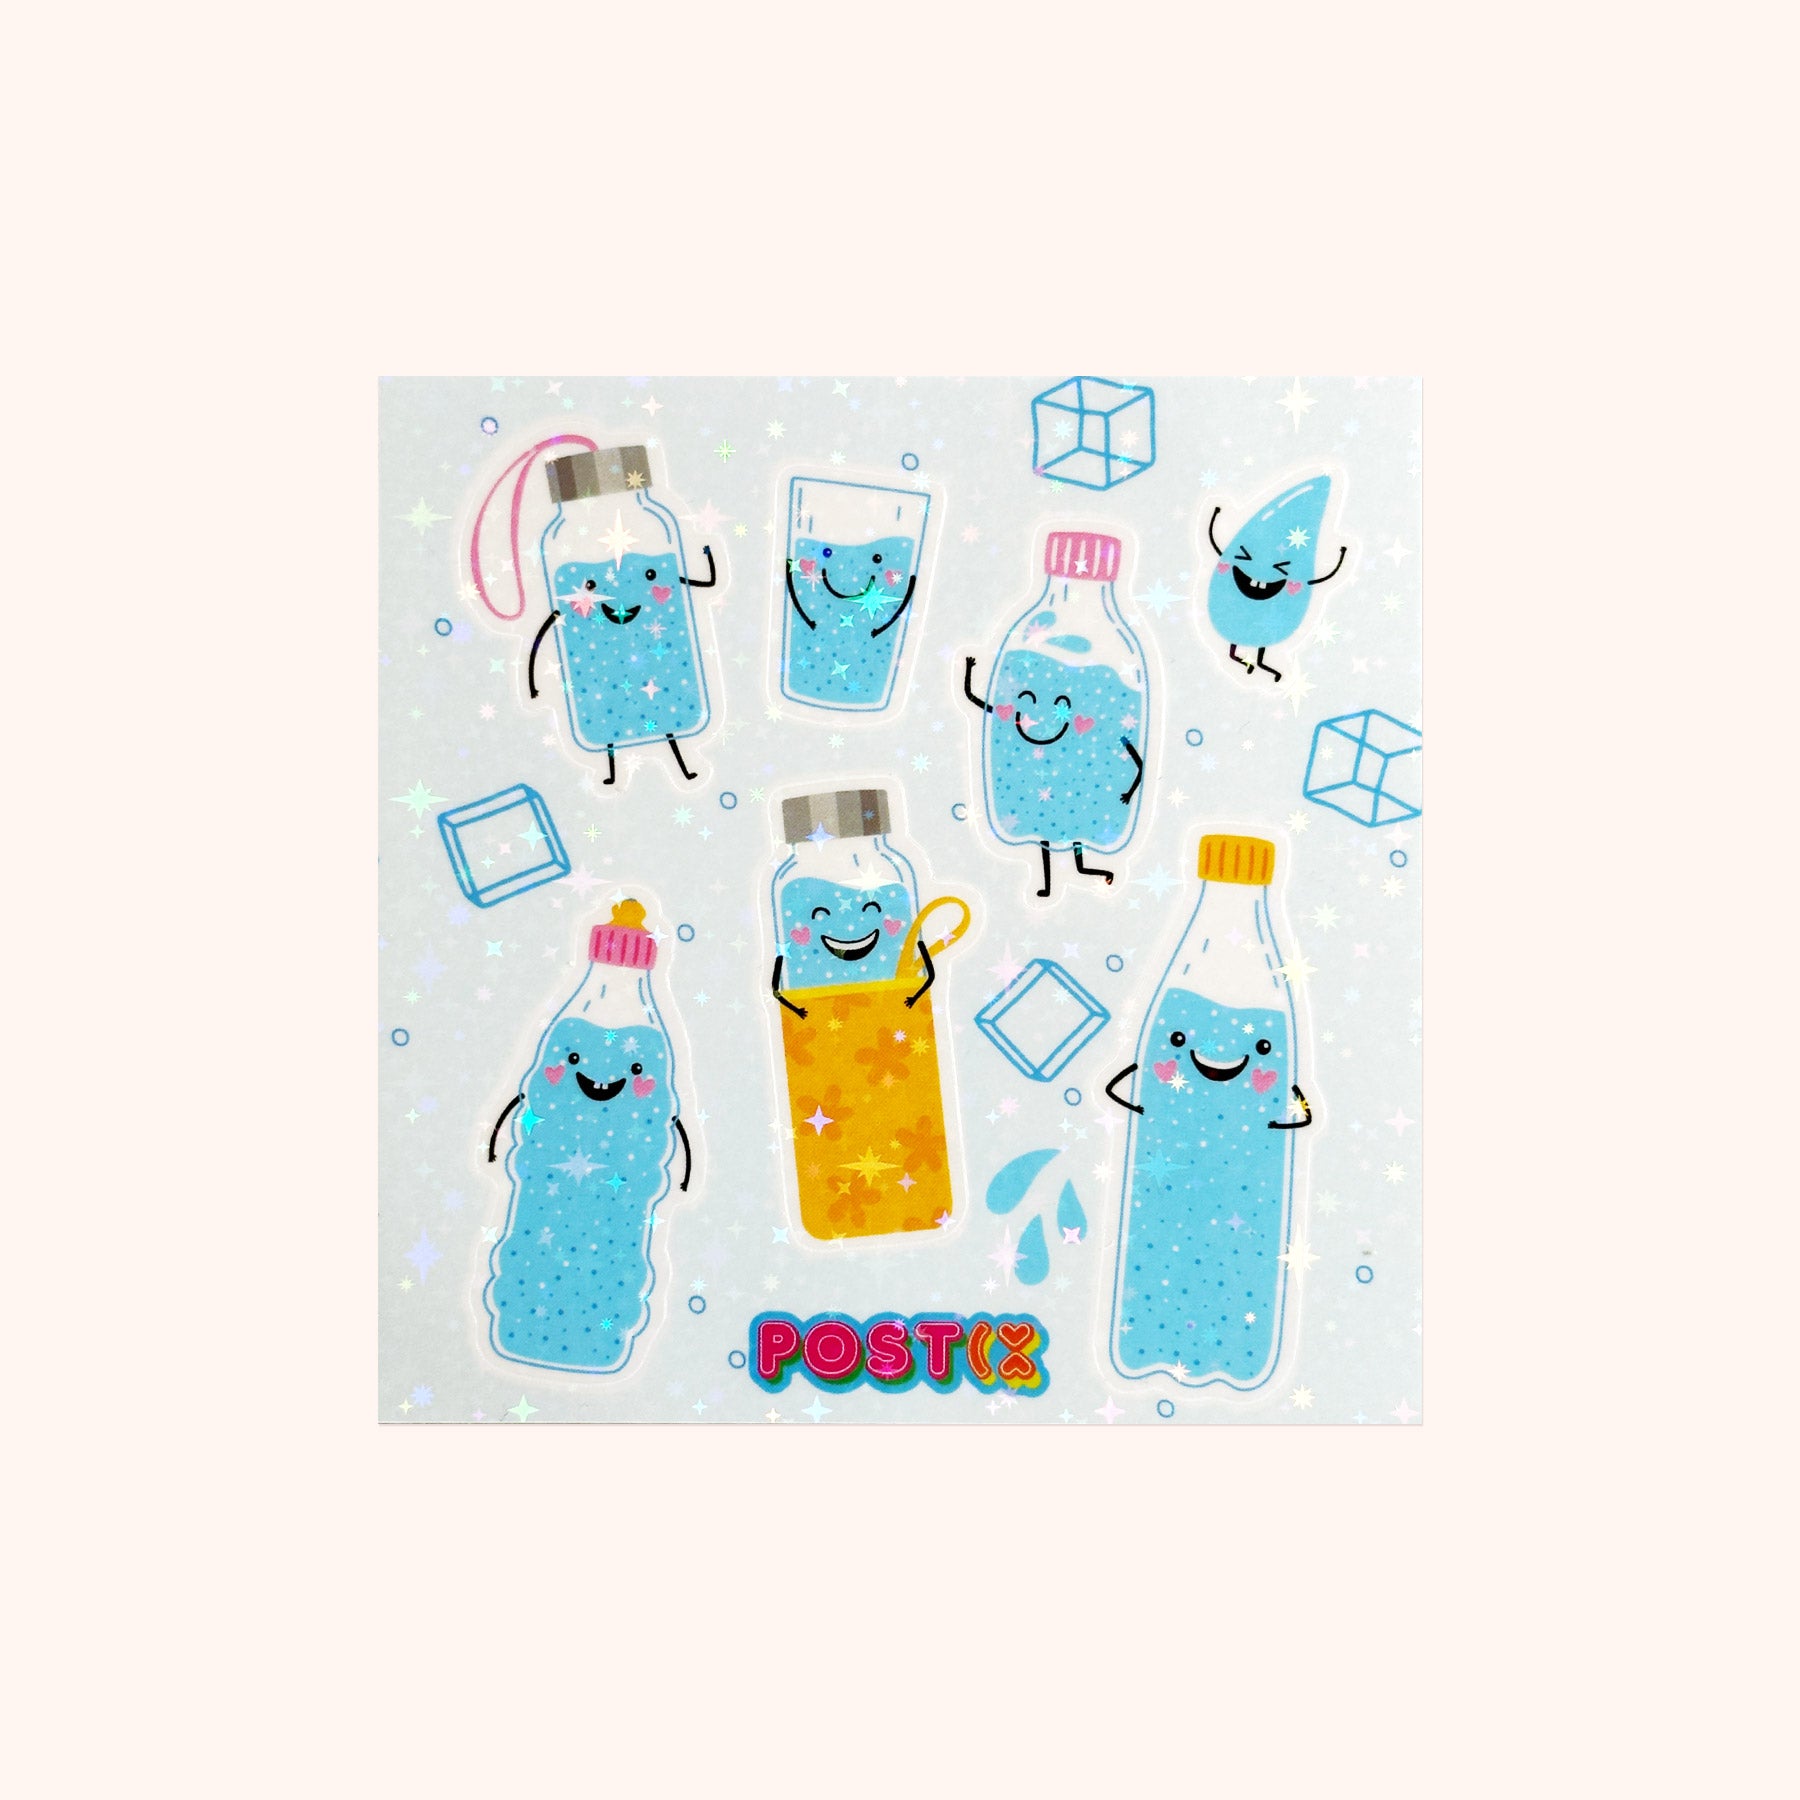 Stay Hydrated Hologram Square Sticker Sheet